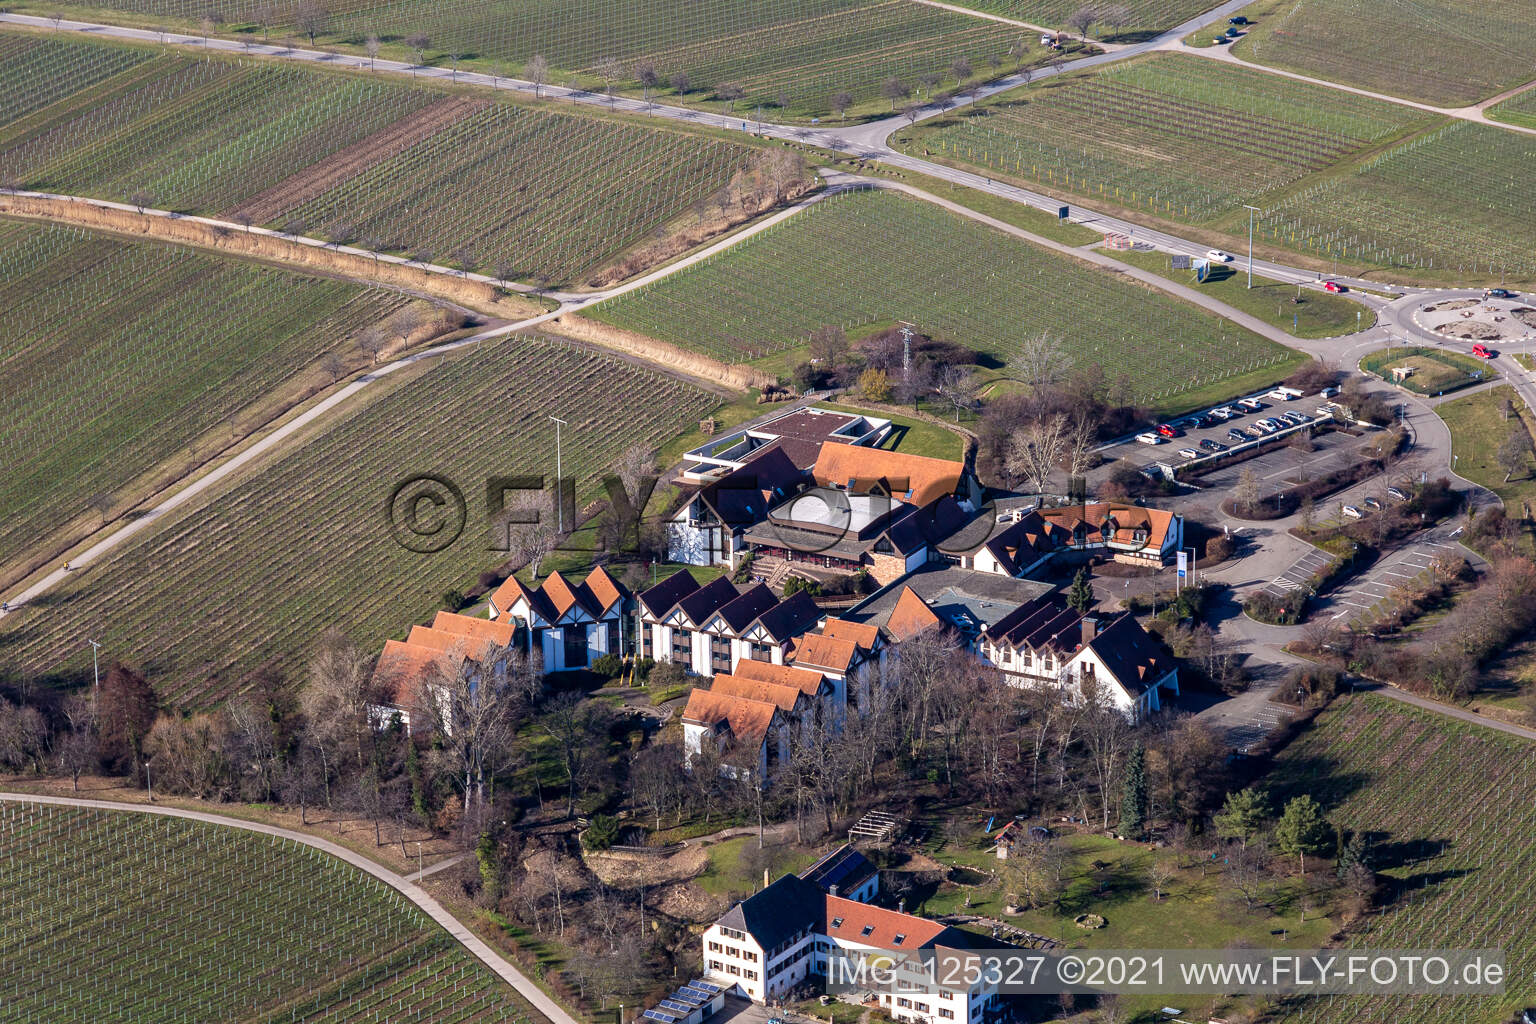 Aerial view of BG RCI in Maikammer in the state Rhineland-Palatinate, Germany